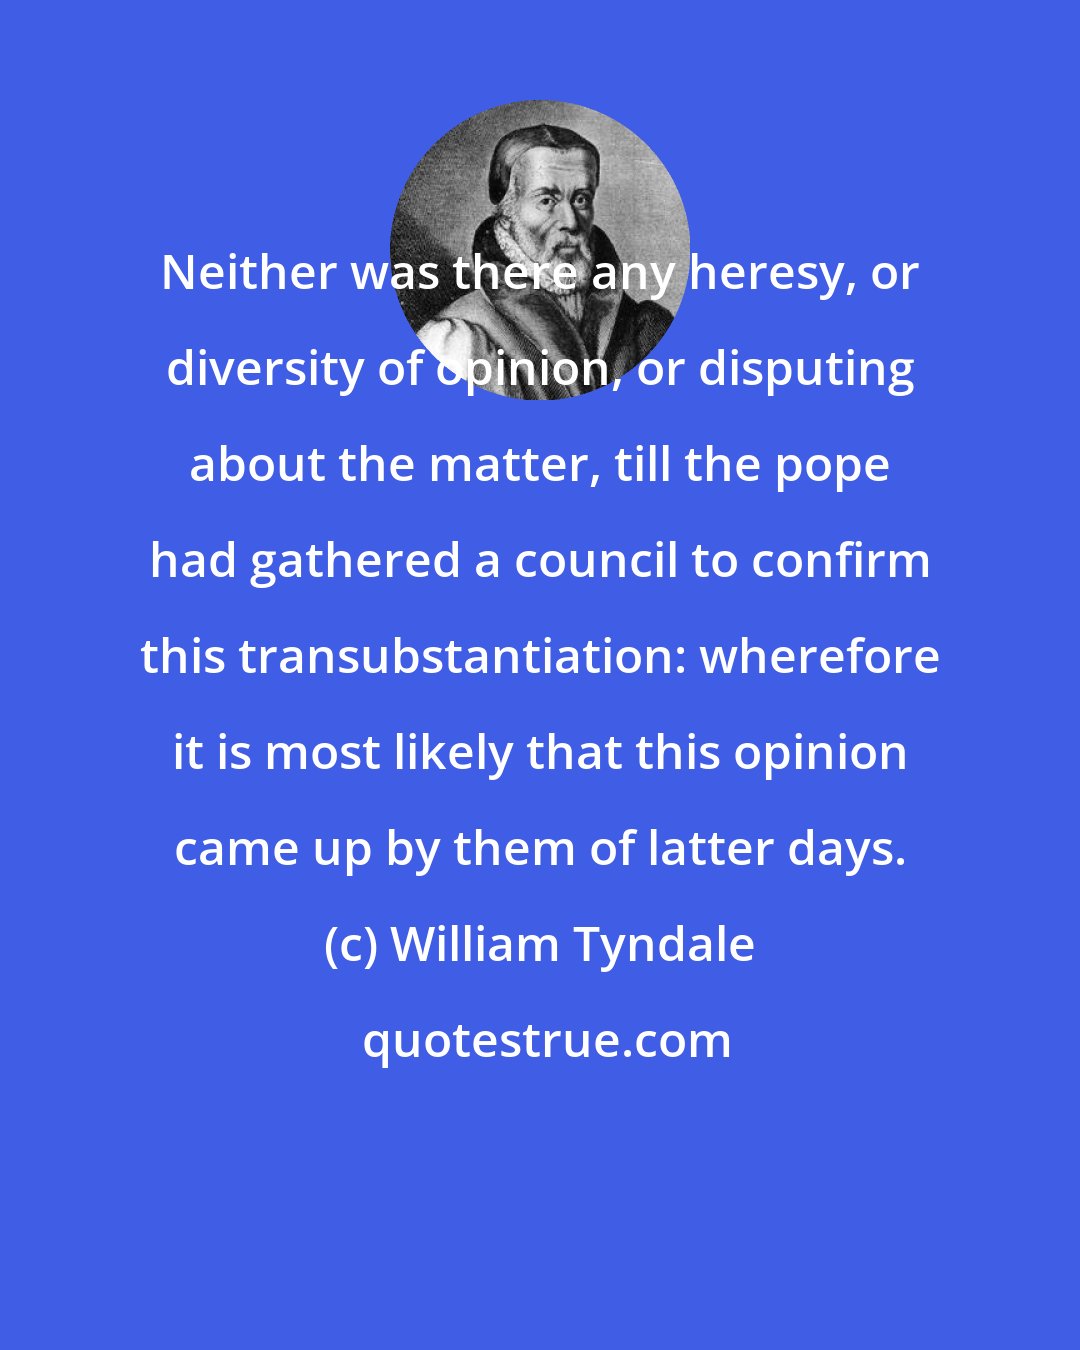 William Tyndale: Neither was there any heresy, or diversity of opinion, or disputing about the matter, till the pope had gathered a council to confirm this transubstantiation: wherefore it is most likely that this opinion came up by them of latter days.